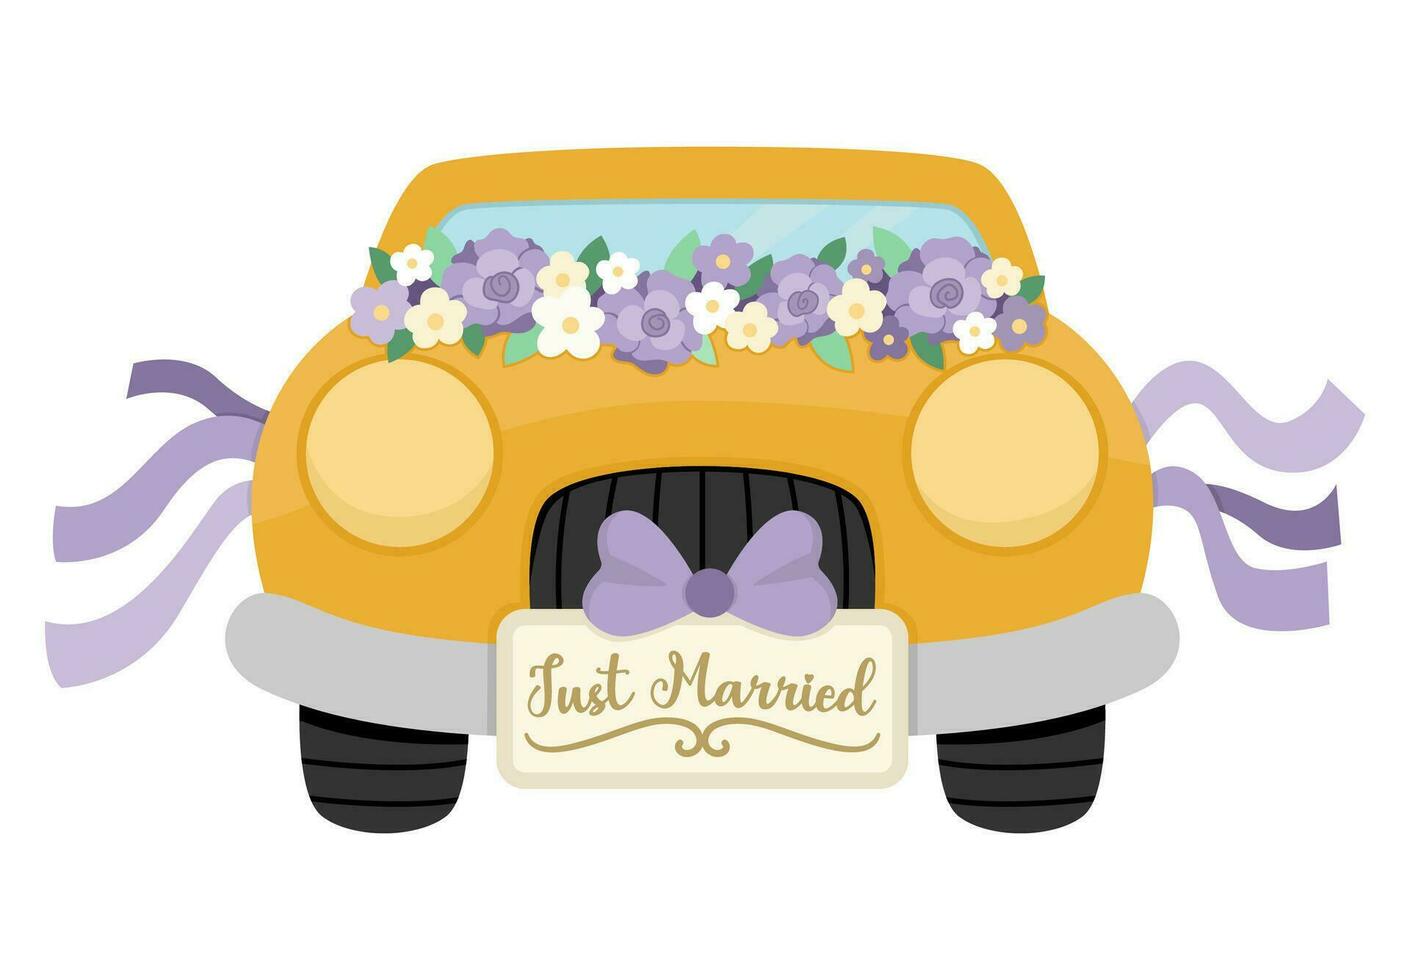 Vector wedding yellow car decorated with purple flowers and ribbons. Honeymoon automobile with just married plate. Cute marriage clipart. Bride and groom transportation. Funny ceremony illustration